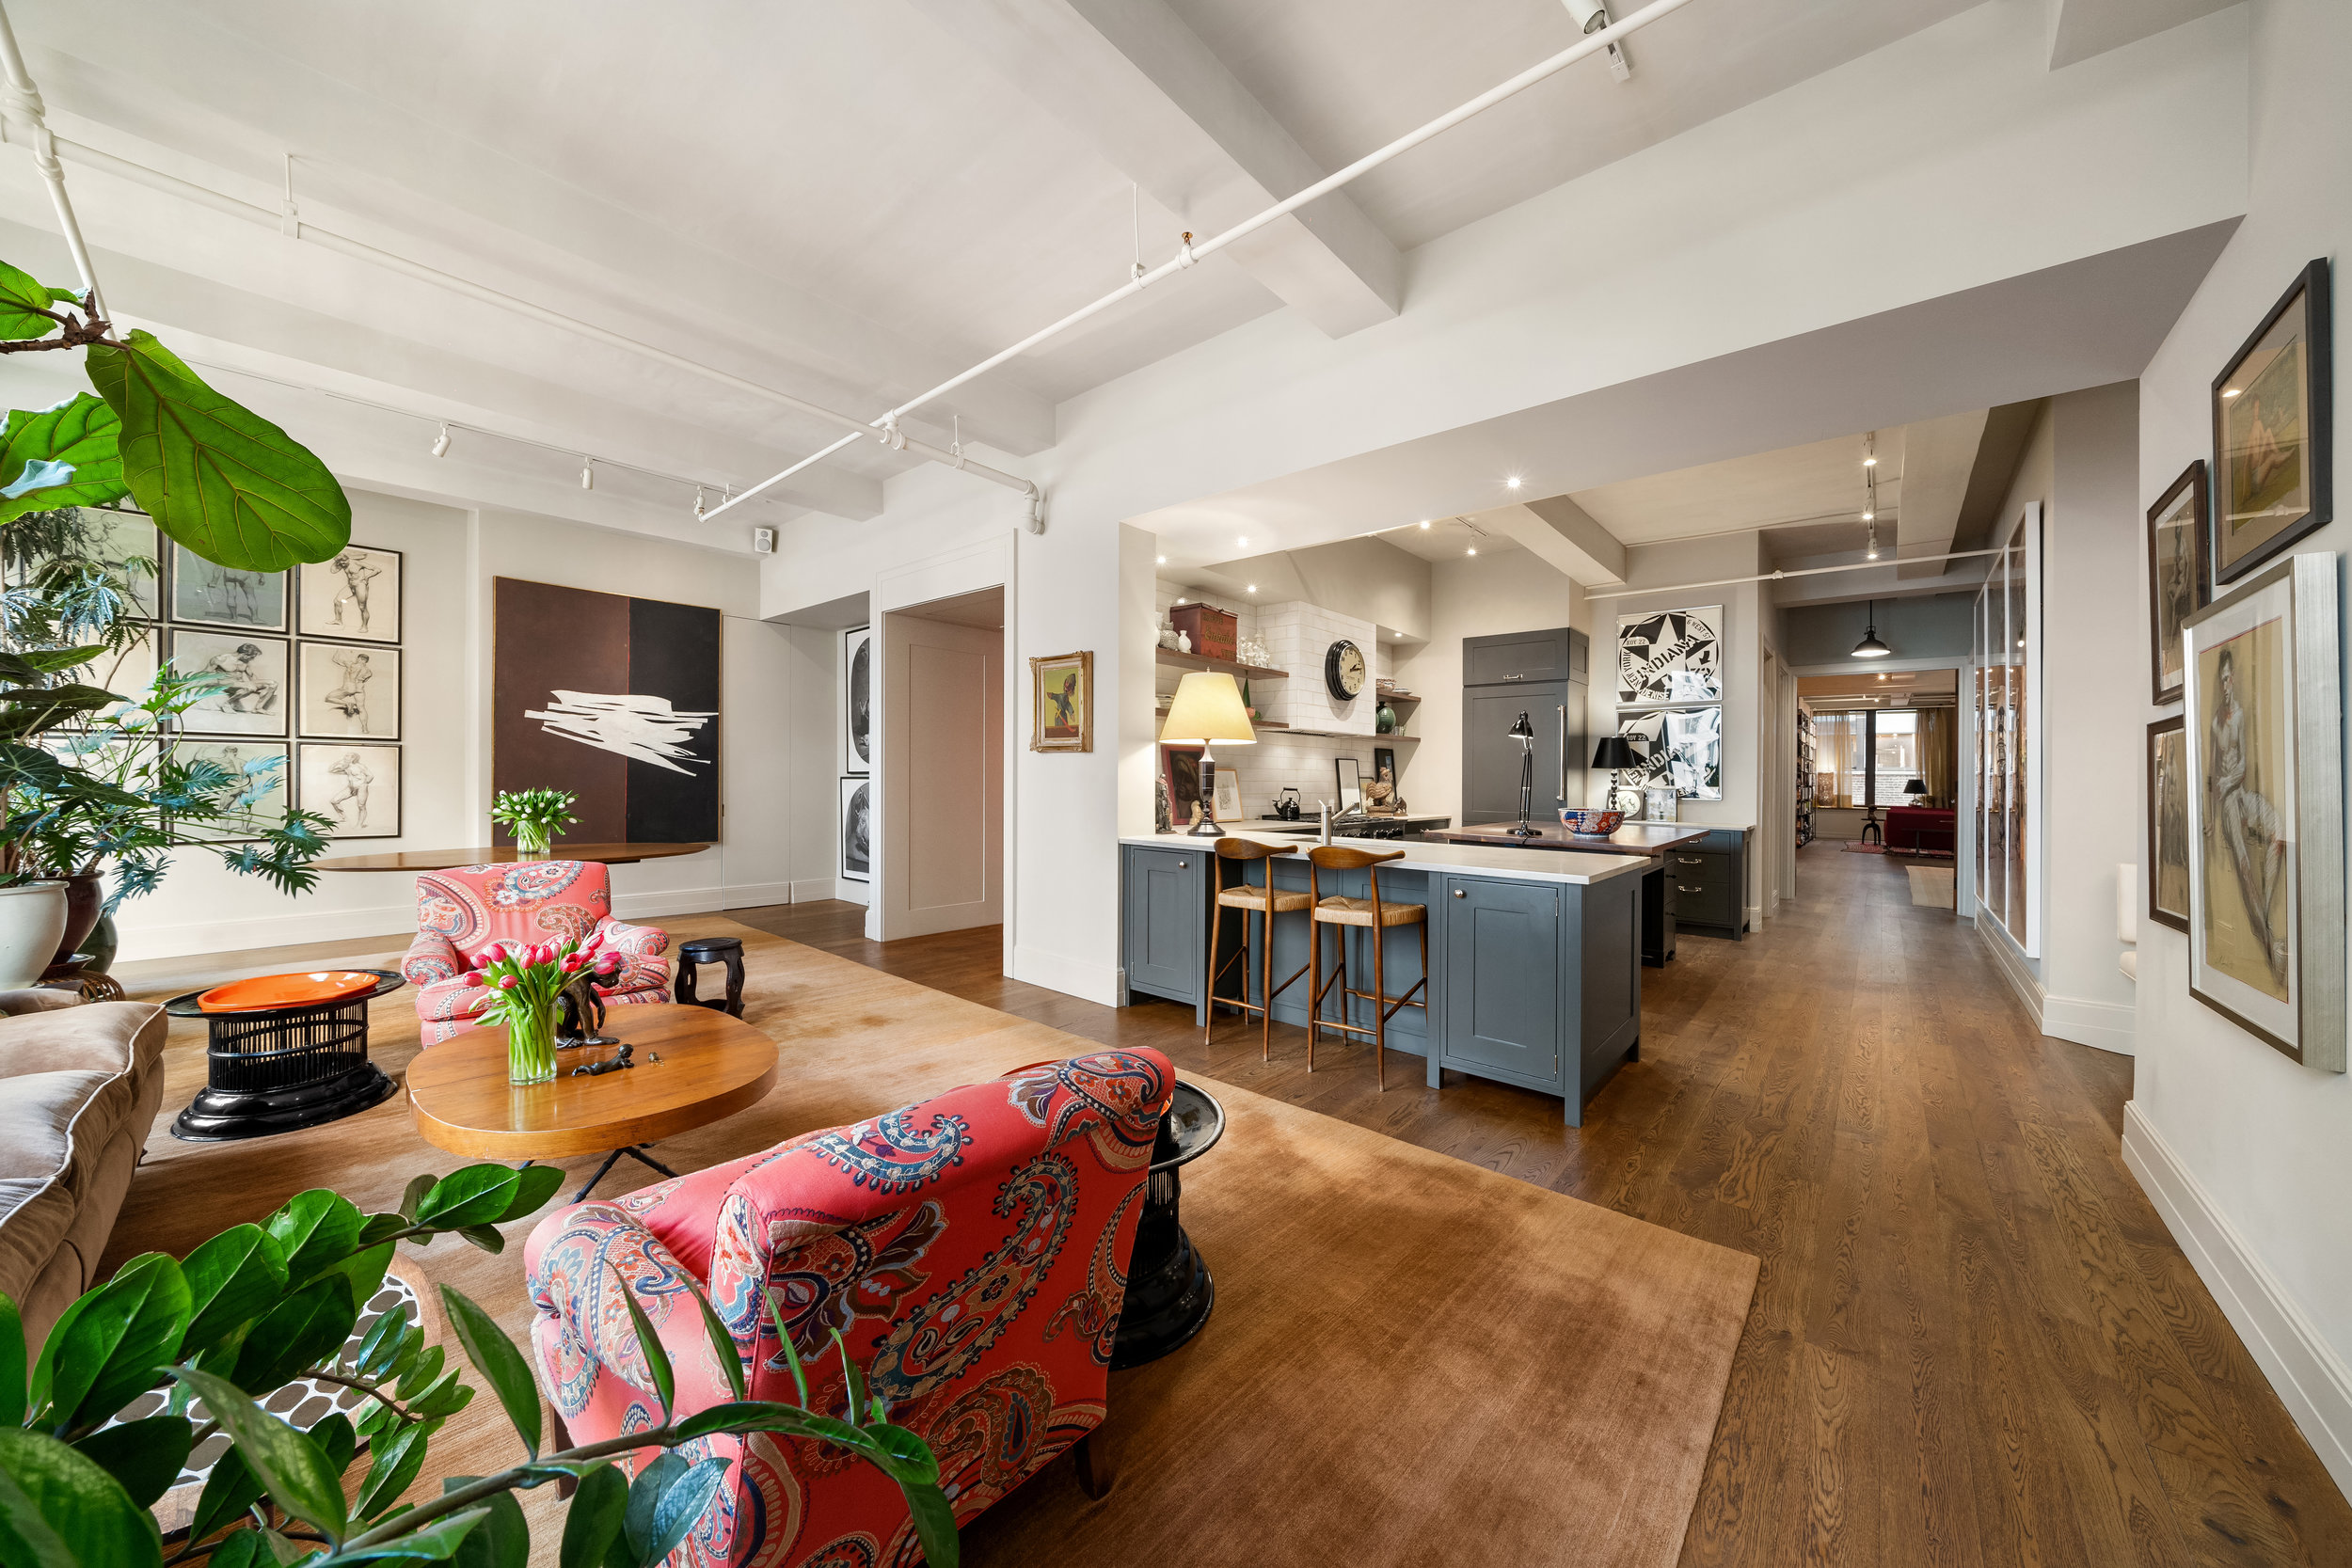 142West26thStreet9-ChelseaNewYork_Holly_Parker_DouglasElliman_Photography_79379400_high_res.jpg